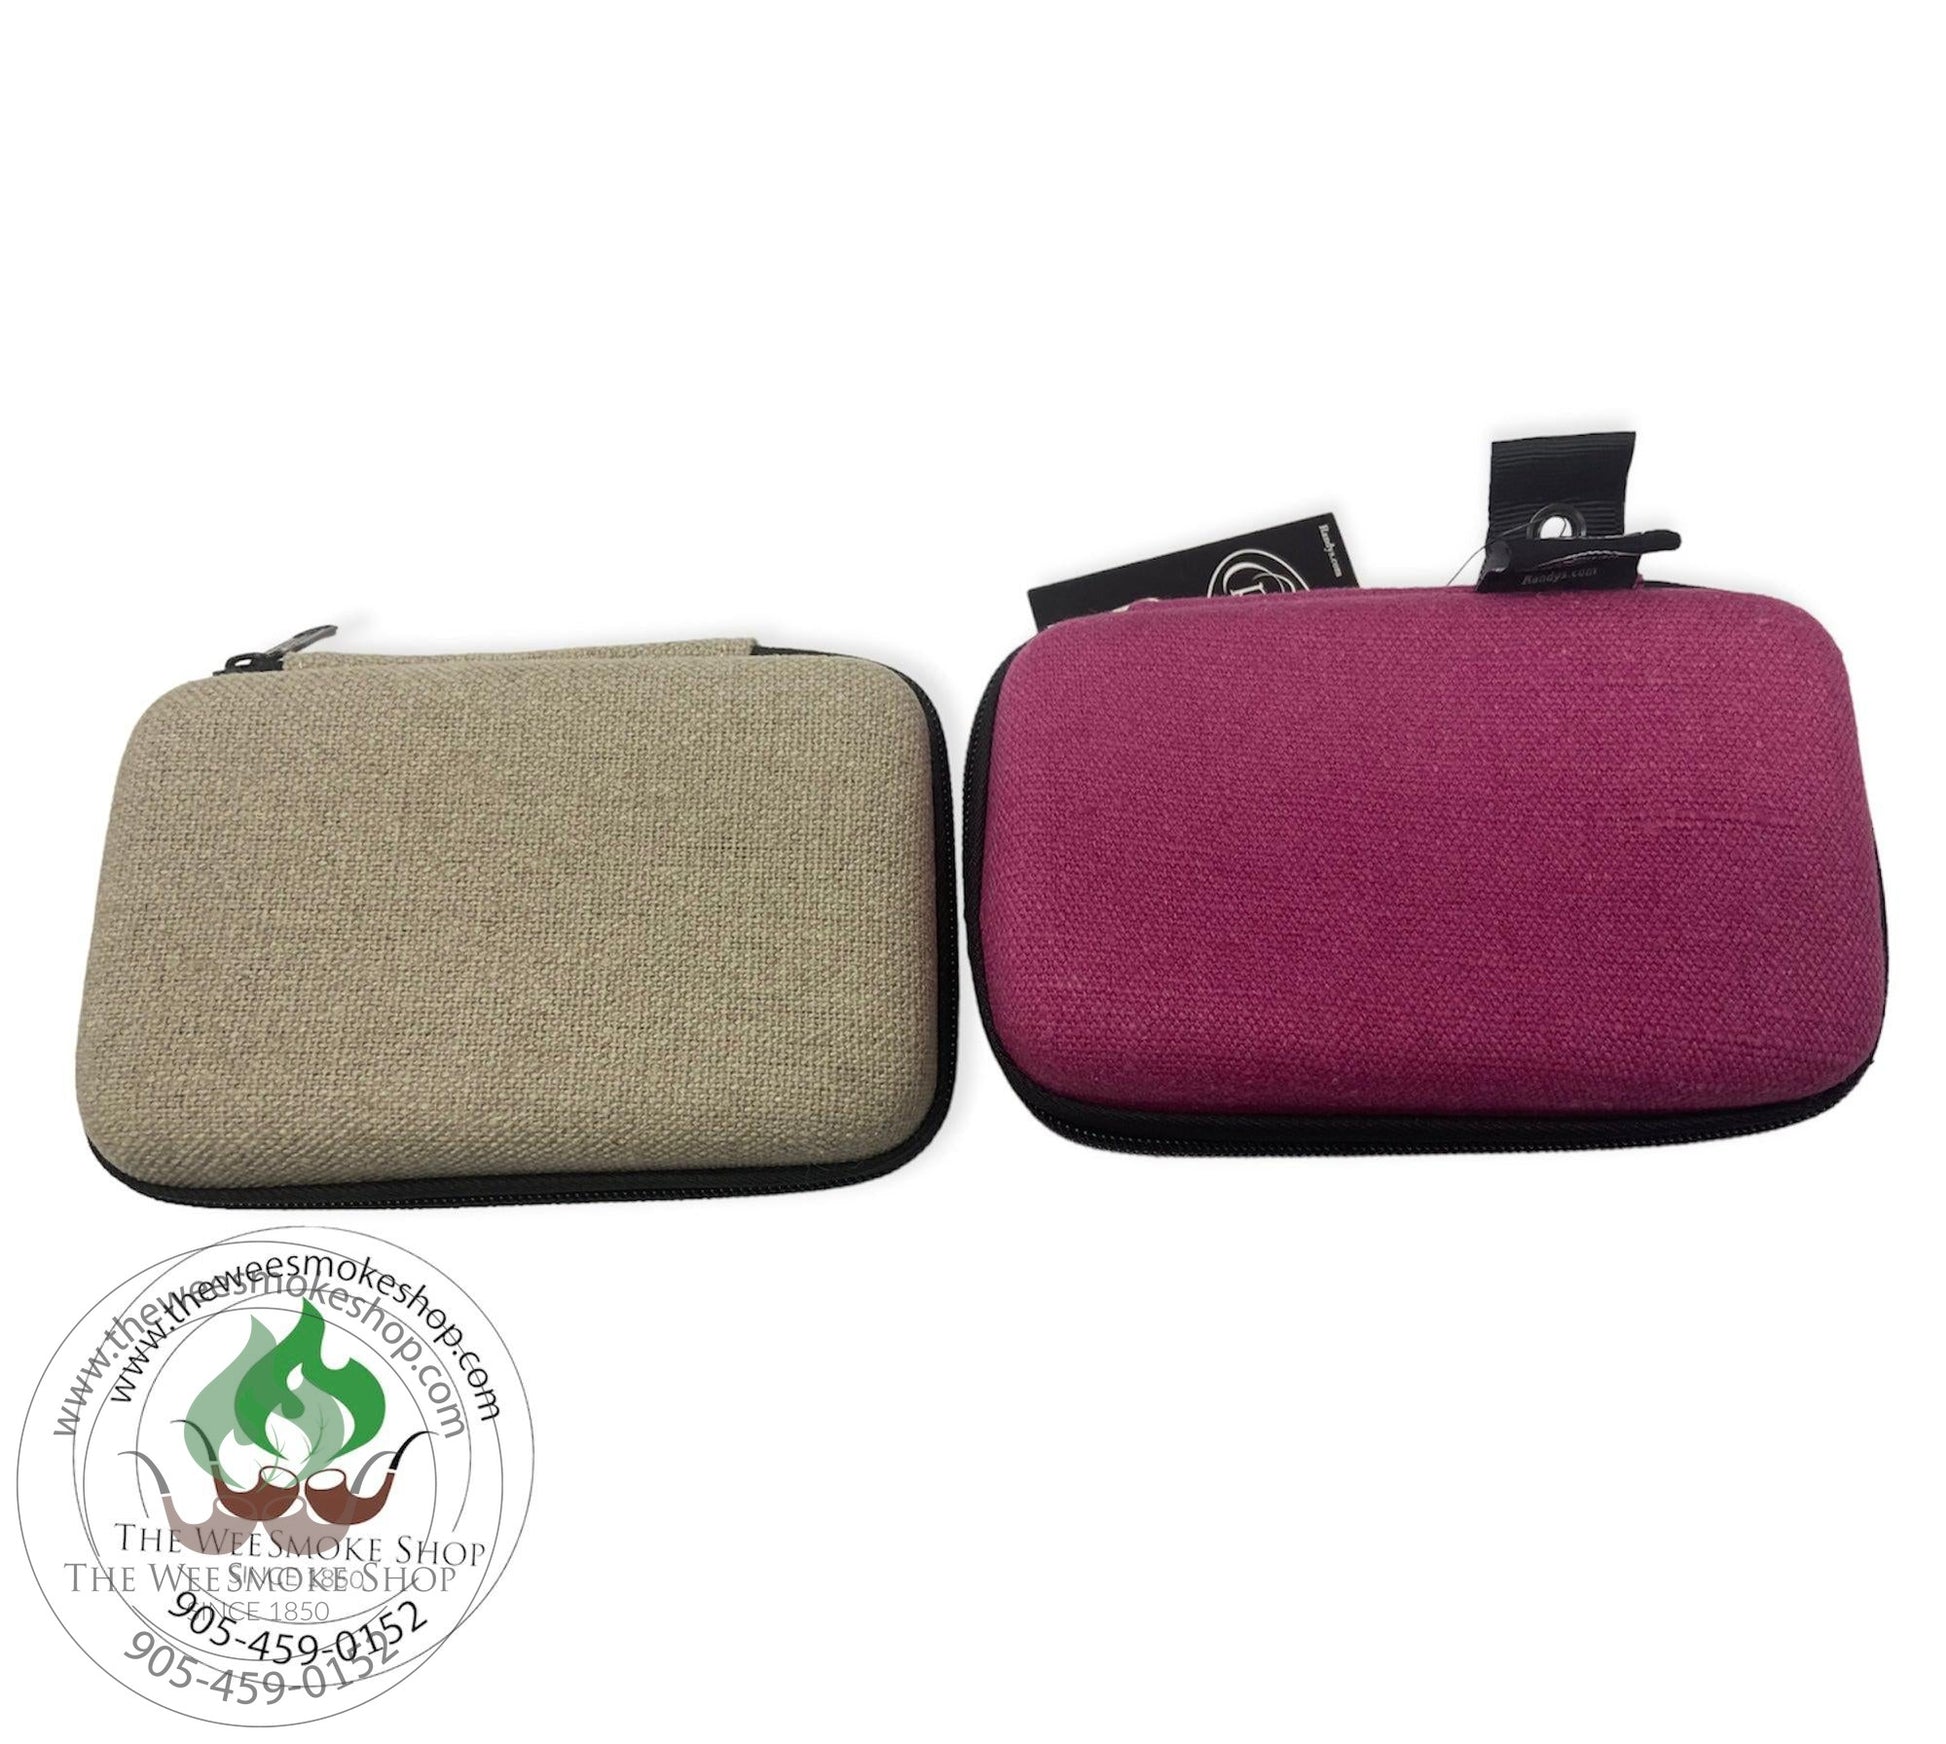 Randys 4" x 6" Hemp Storage Case-Beige on the left, Pink on the right